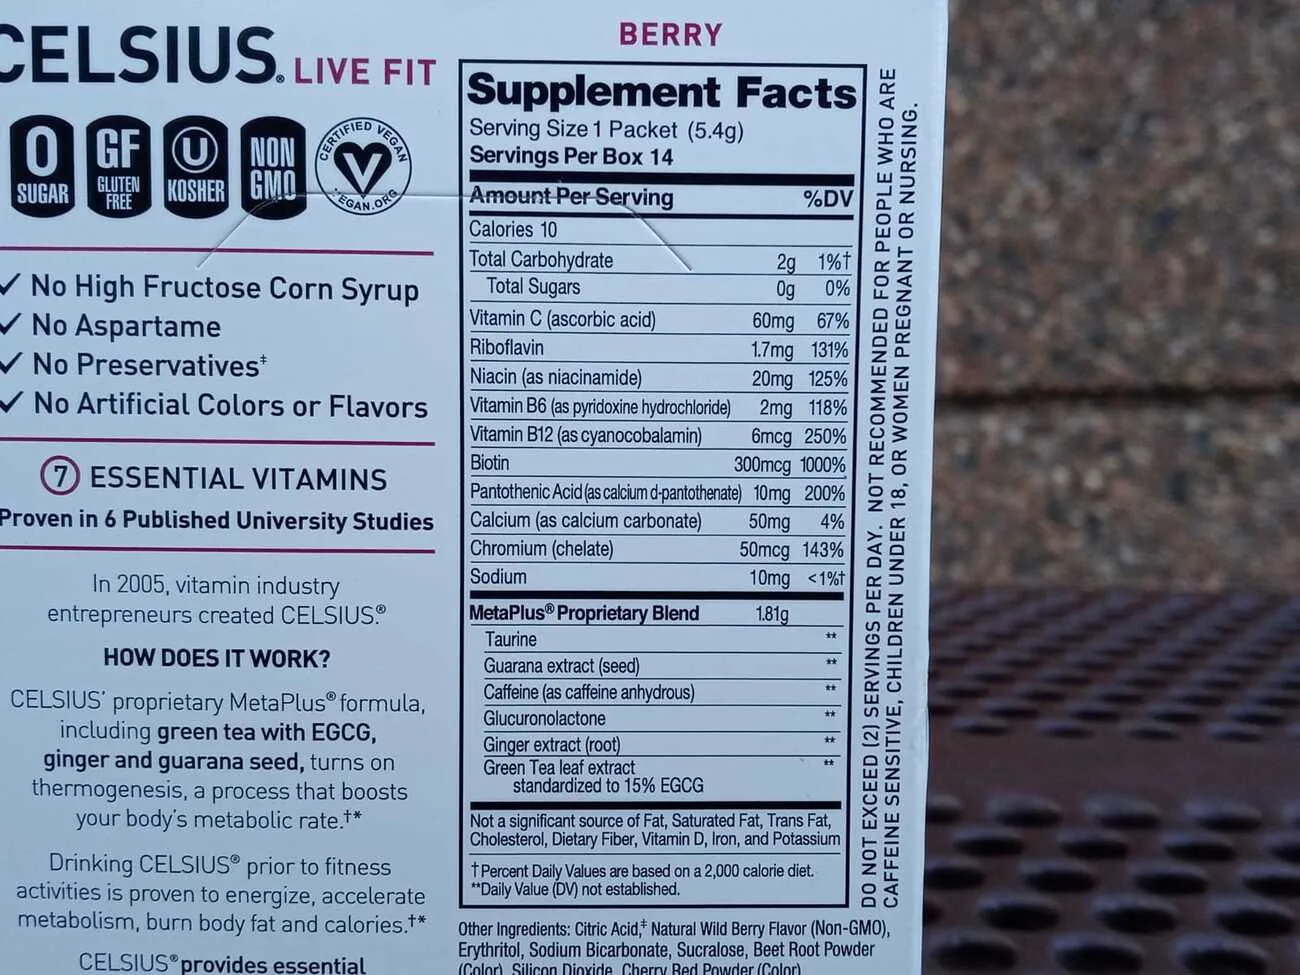 Supplement facts of Celsius on-the-go